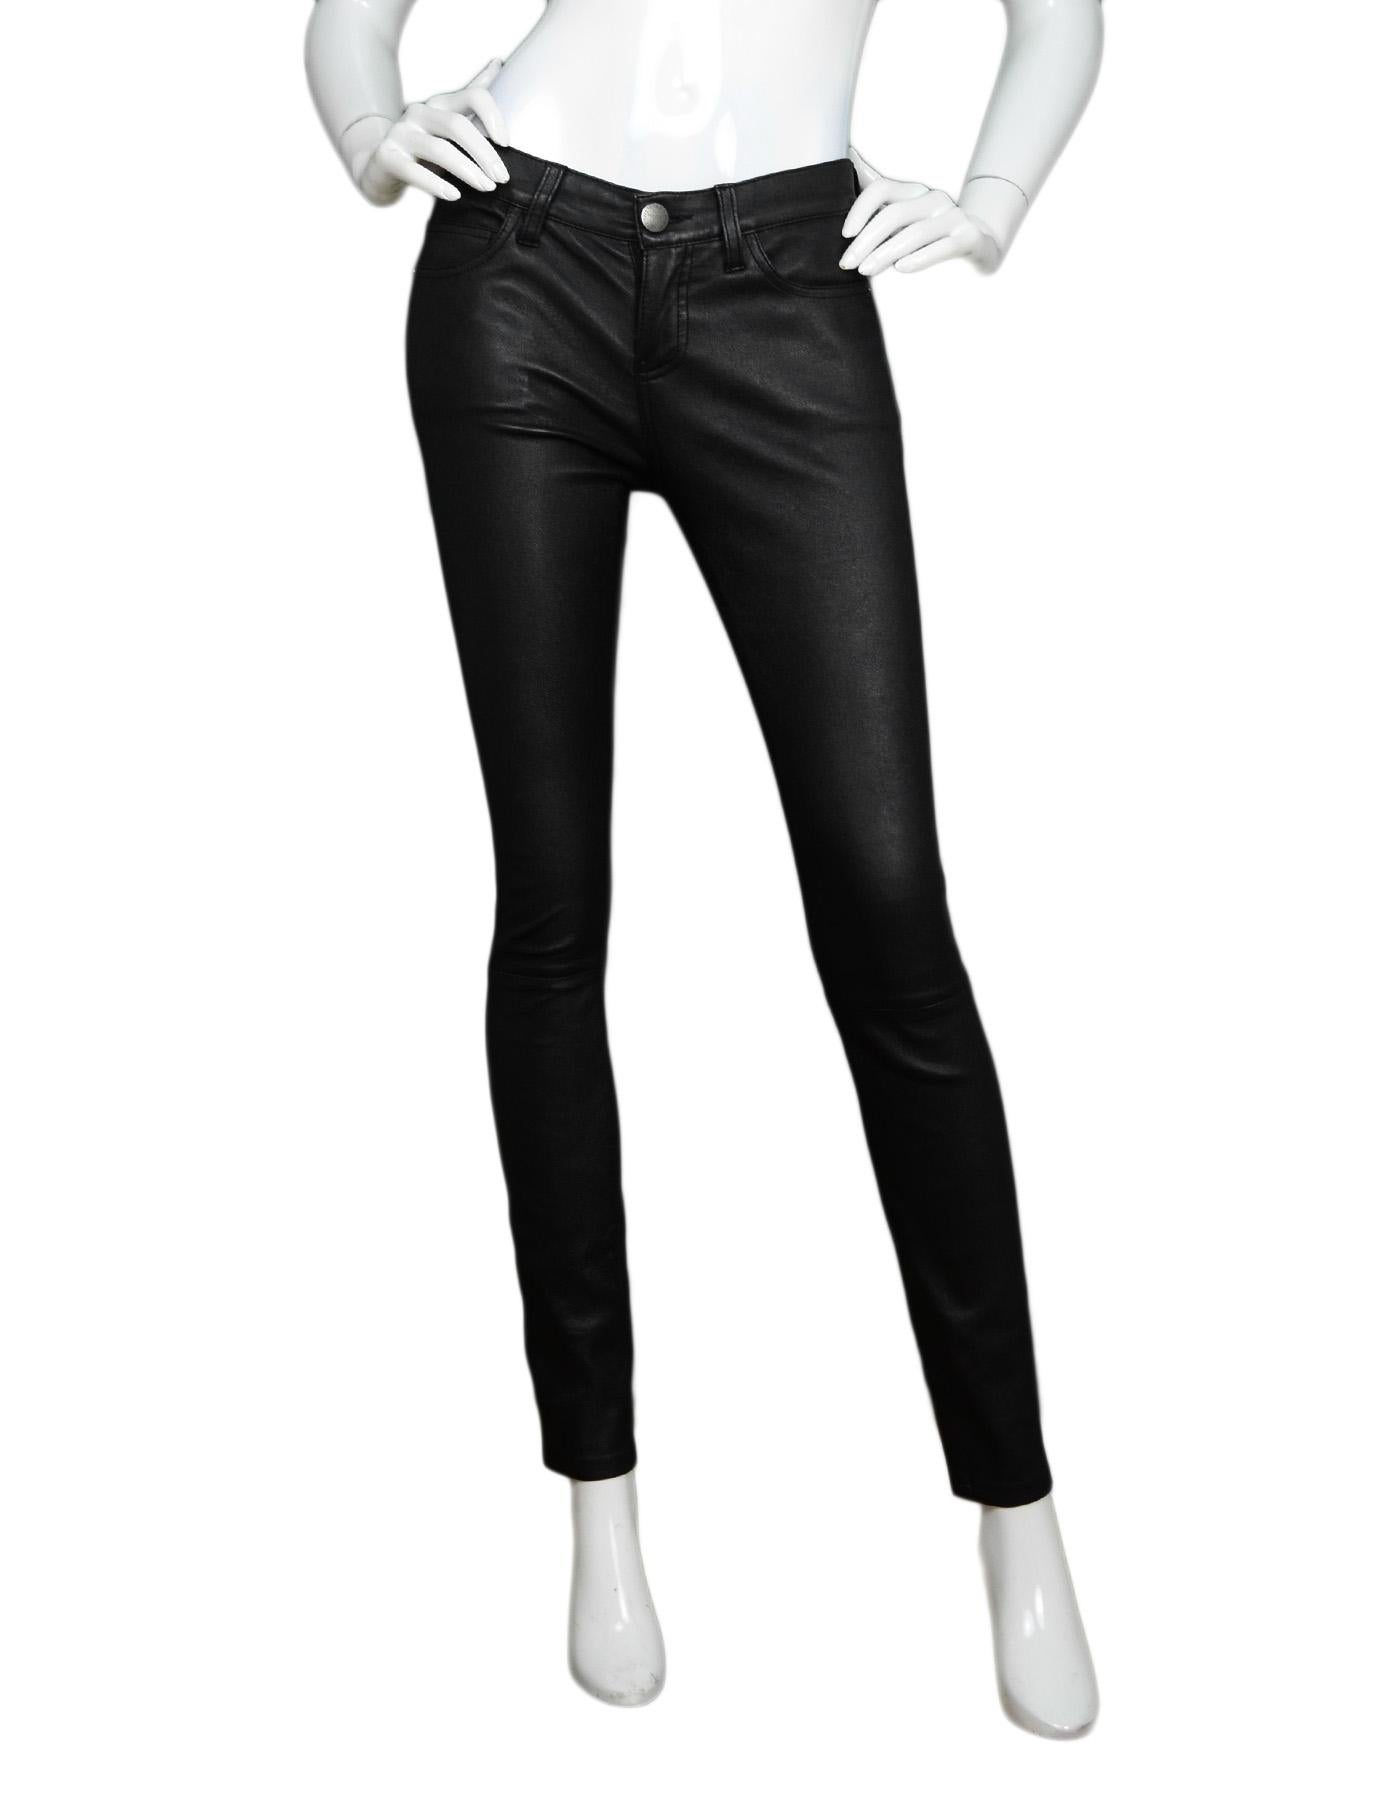 Current/Elliot Black Leather The Ankle Skinny Pants Sz 26

Made In:  China
Color: Black
Materials: 100% stretch lamb leather
Overall Condition: Excellent pre-owned condition 
Estimated Retail: $985 + tax

Measurements:   
Waist: 30